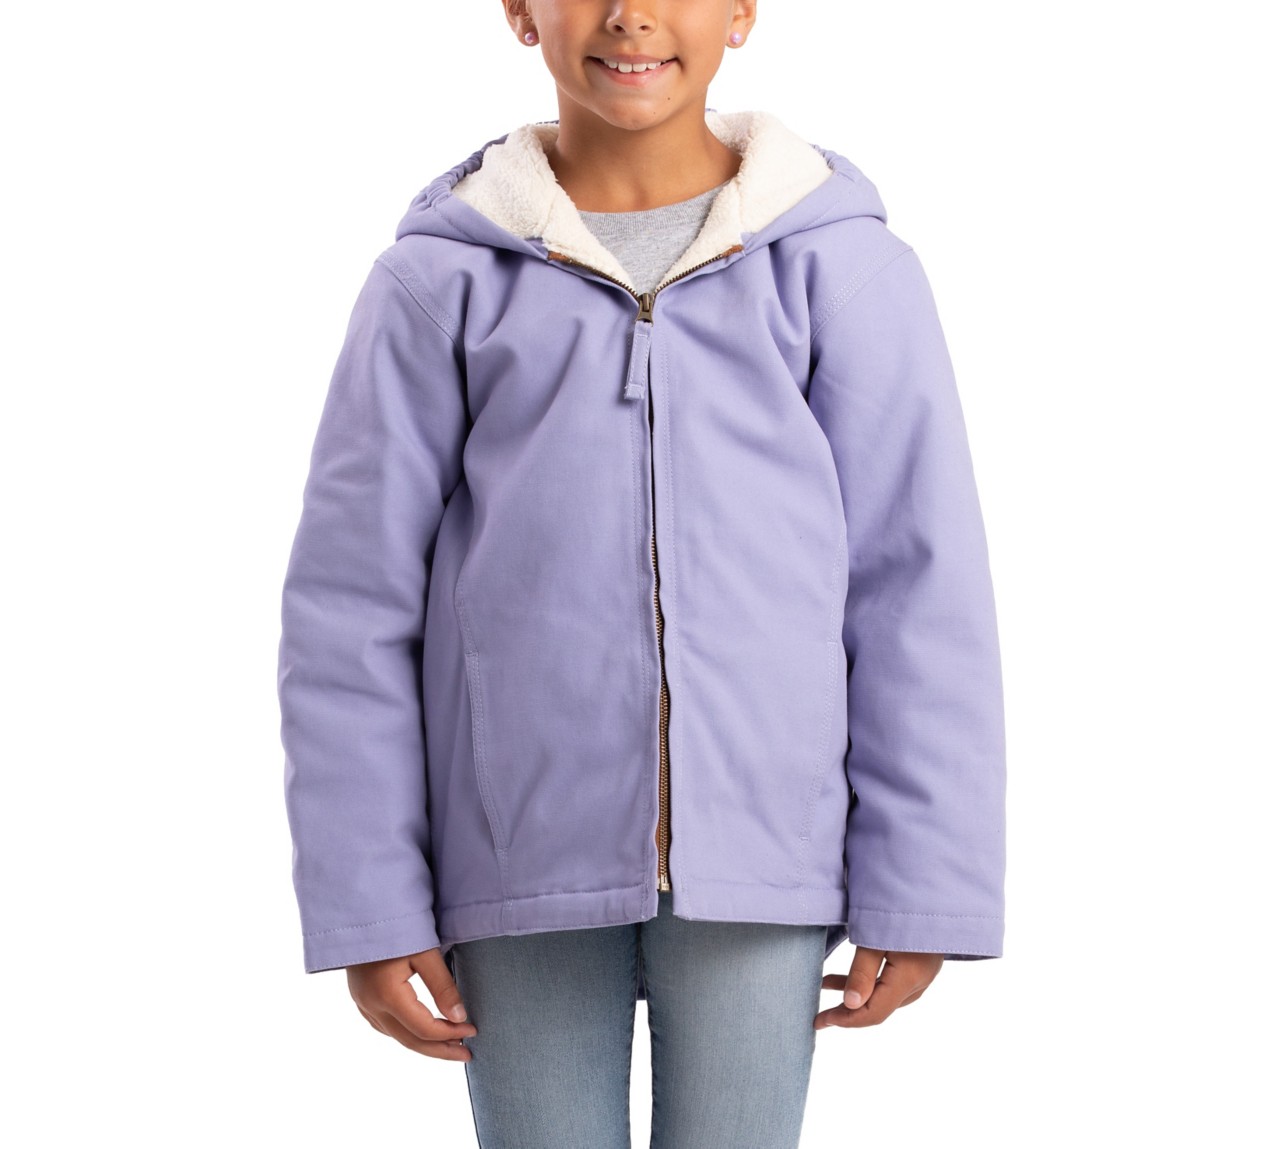 Image of a kid in a coat links to all kids coats and jackets catalog.